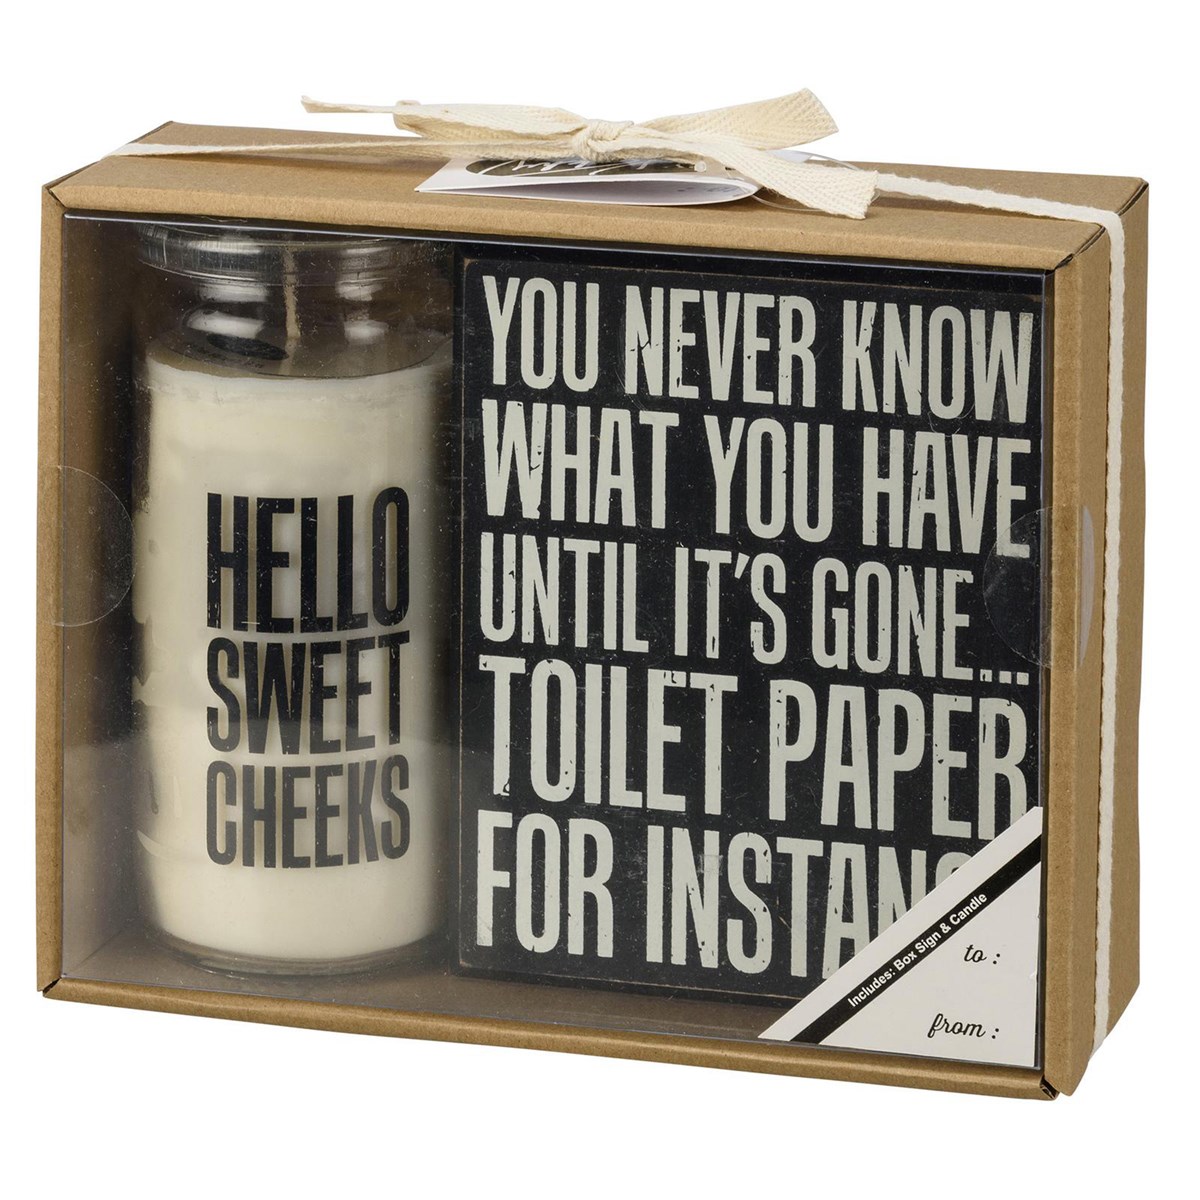 Toilet Paper Box Sign And Candle Set - Wood, Soy Wax, Glass